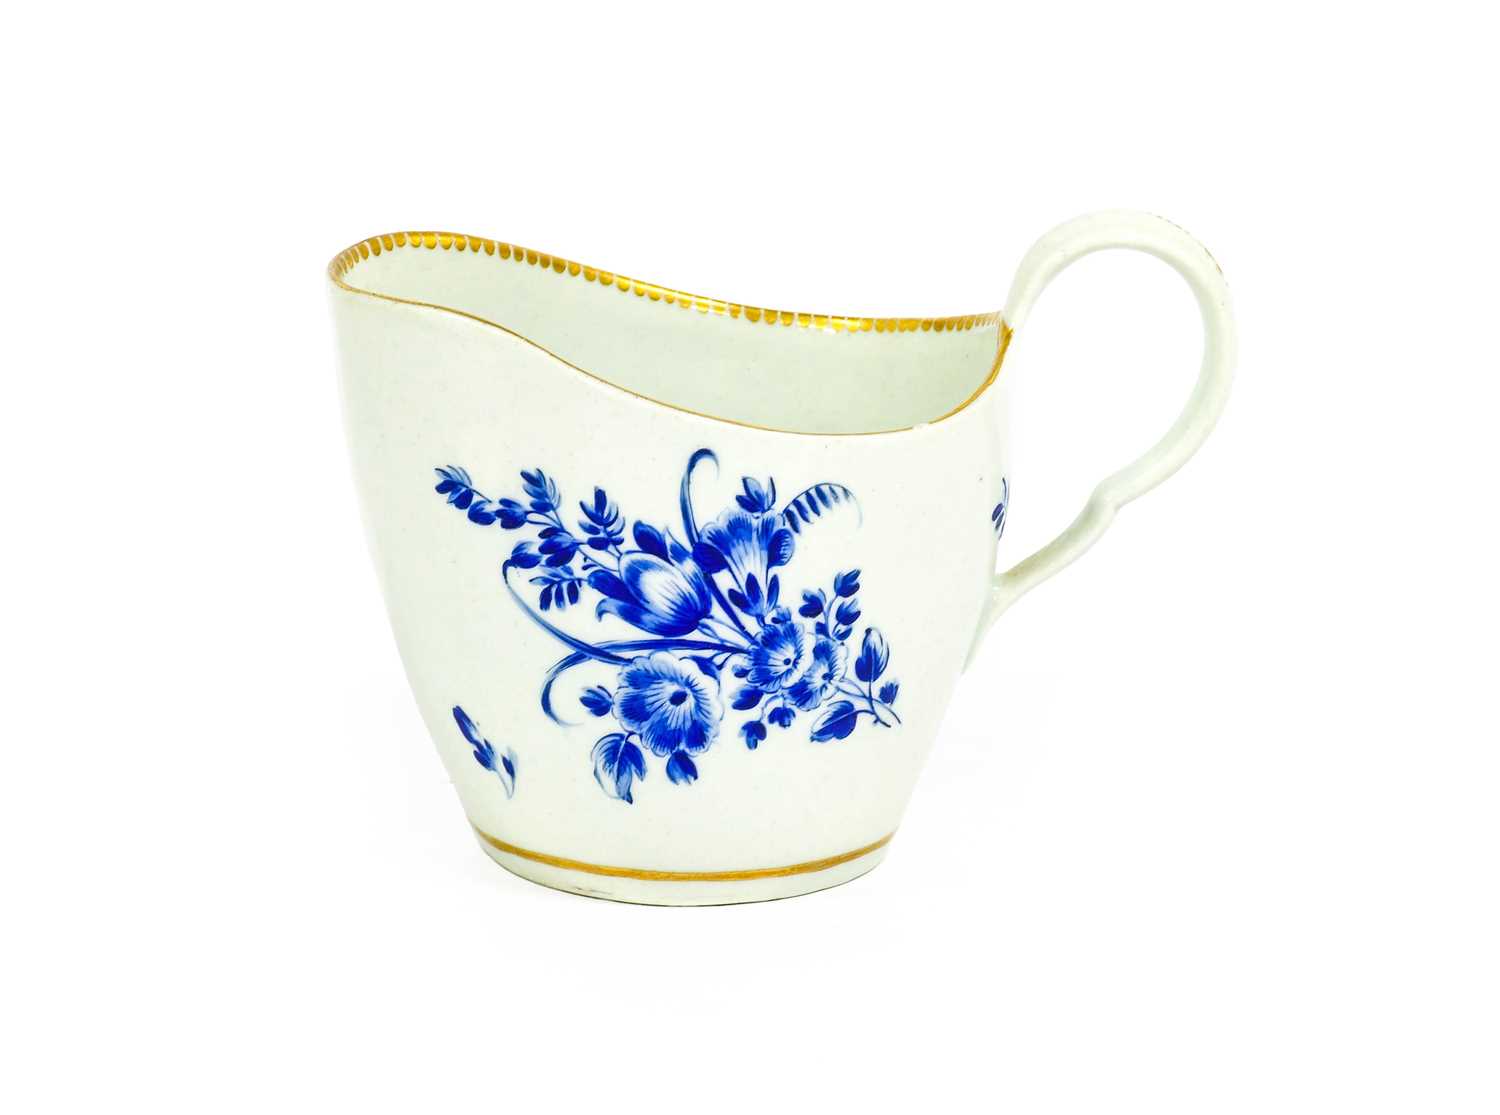 A Worcester Porcelain Cream Jug, circa 1770, of ovoid form and with scrolling handle, decorated with